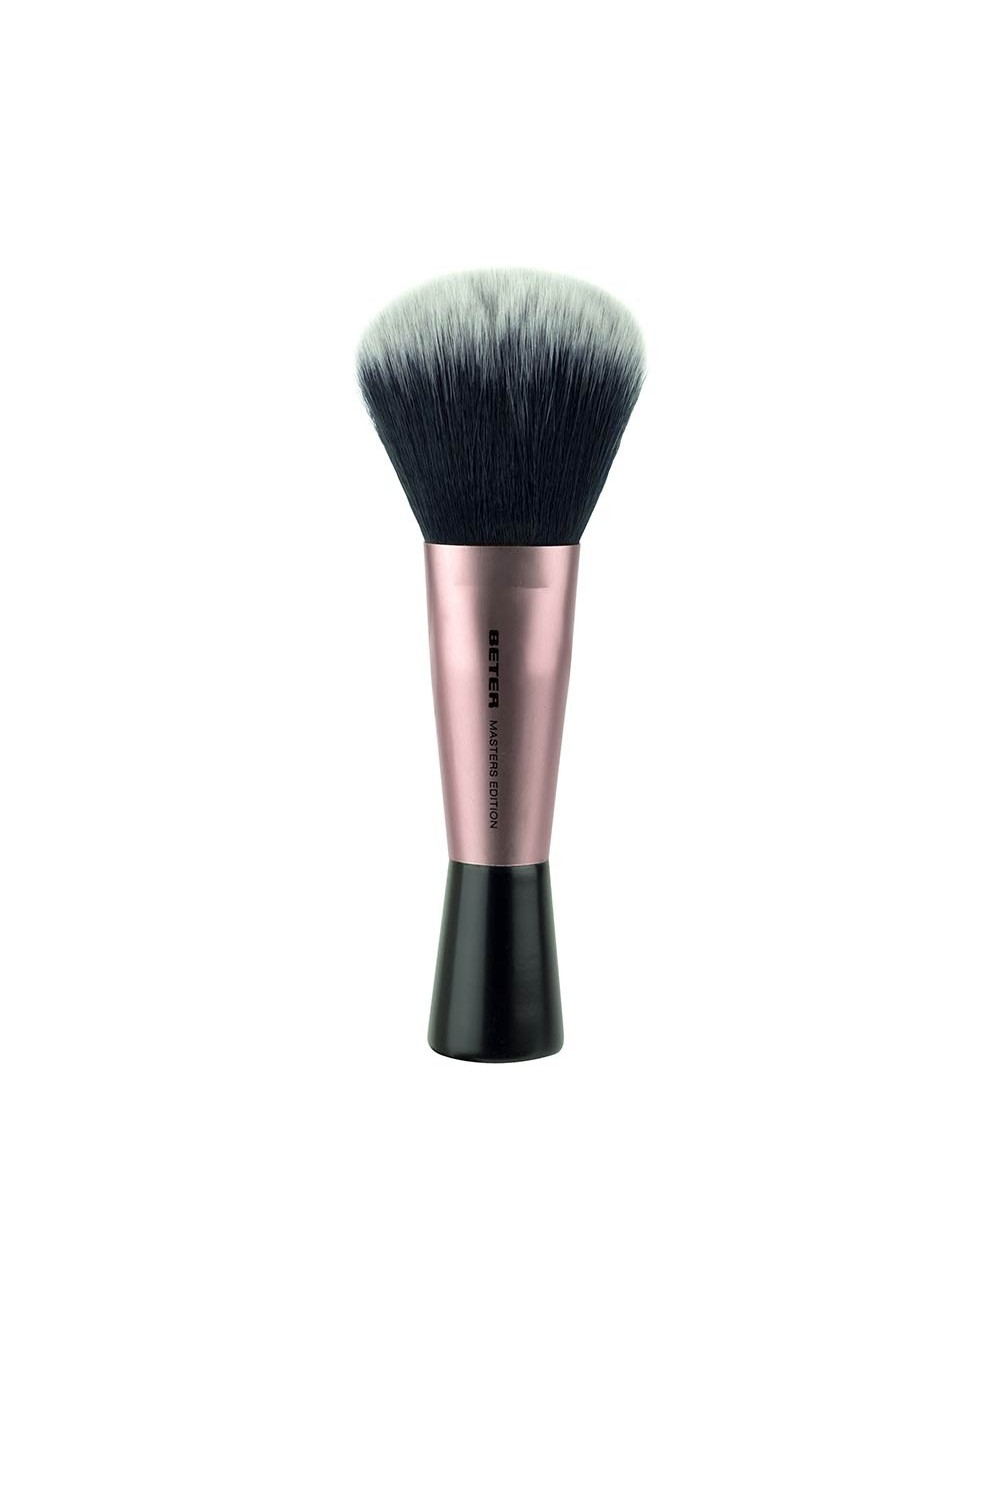 Beter Thick Brush For Powder Makeup